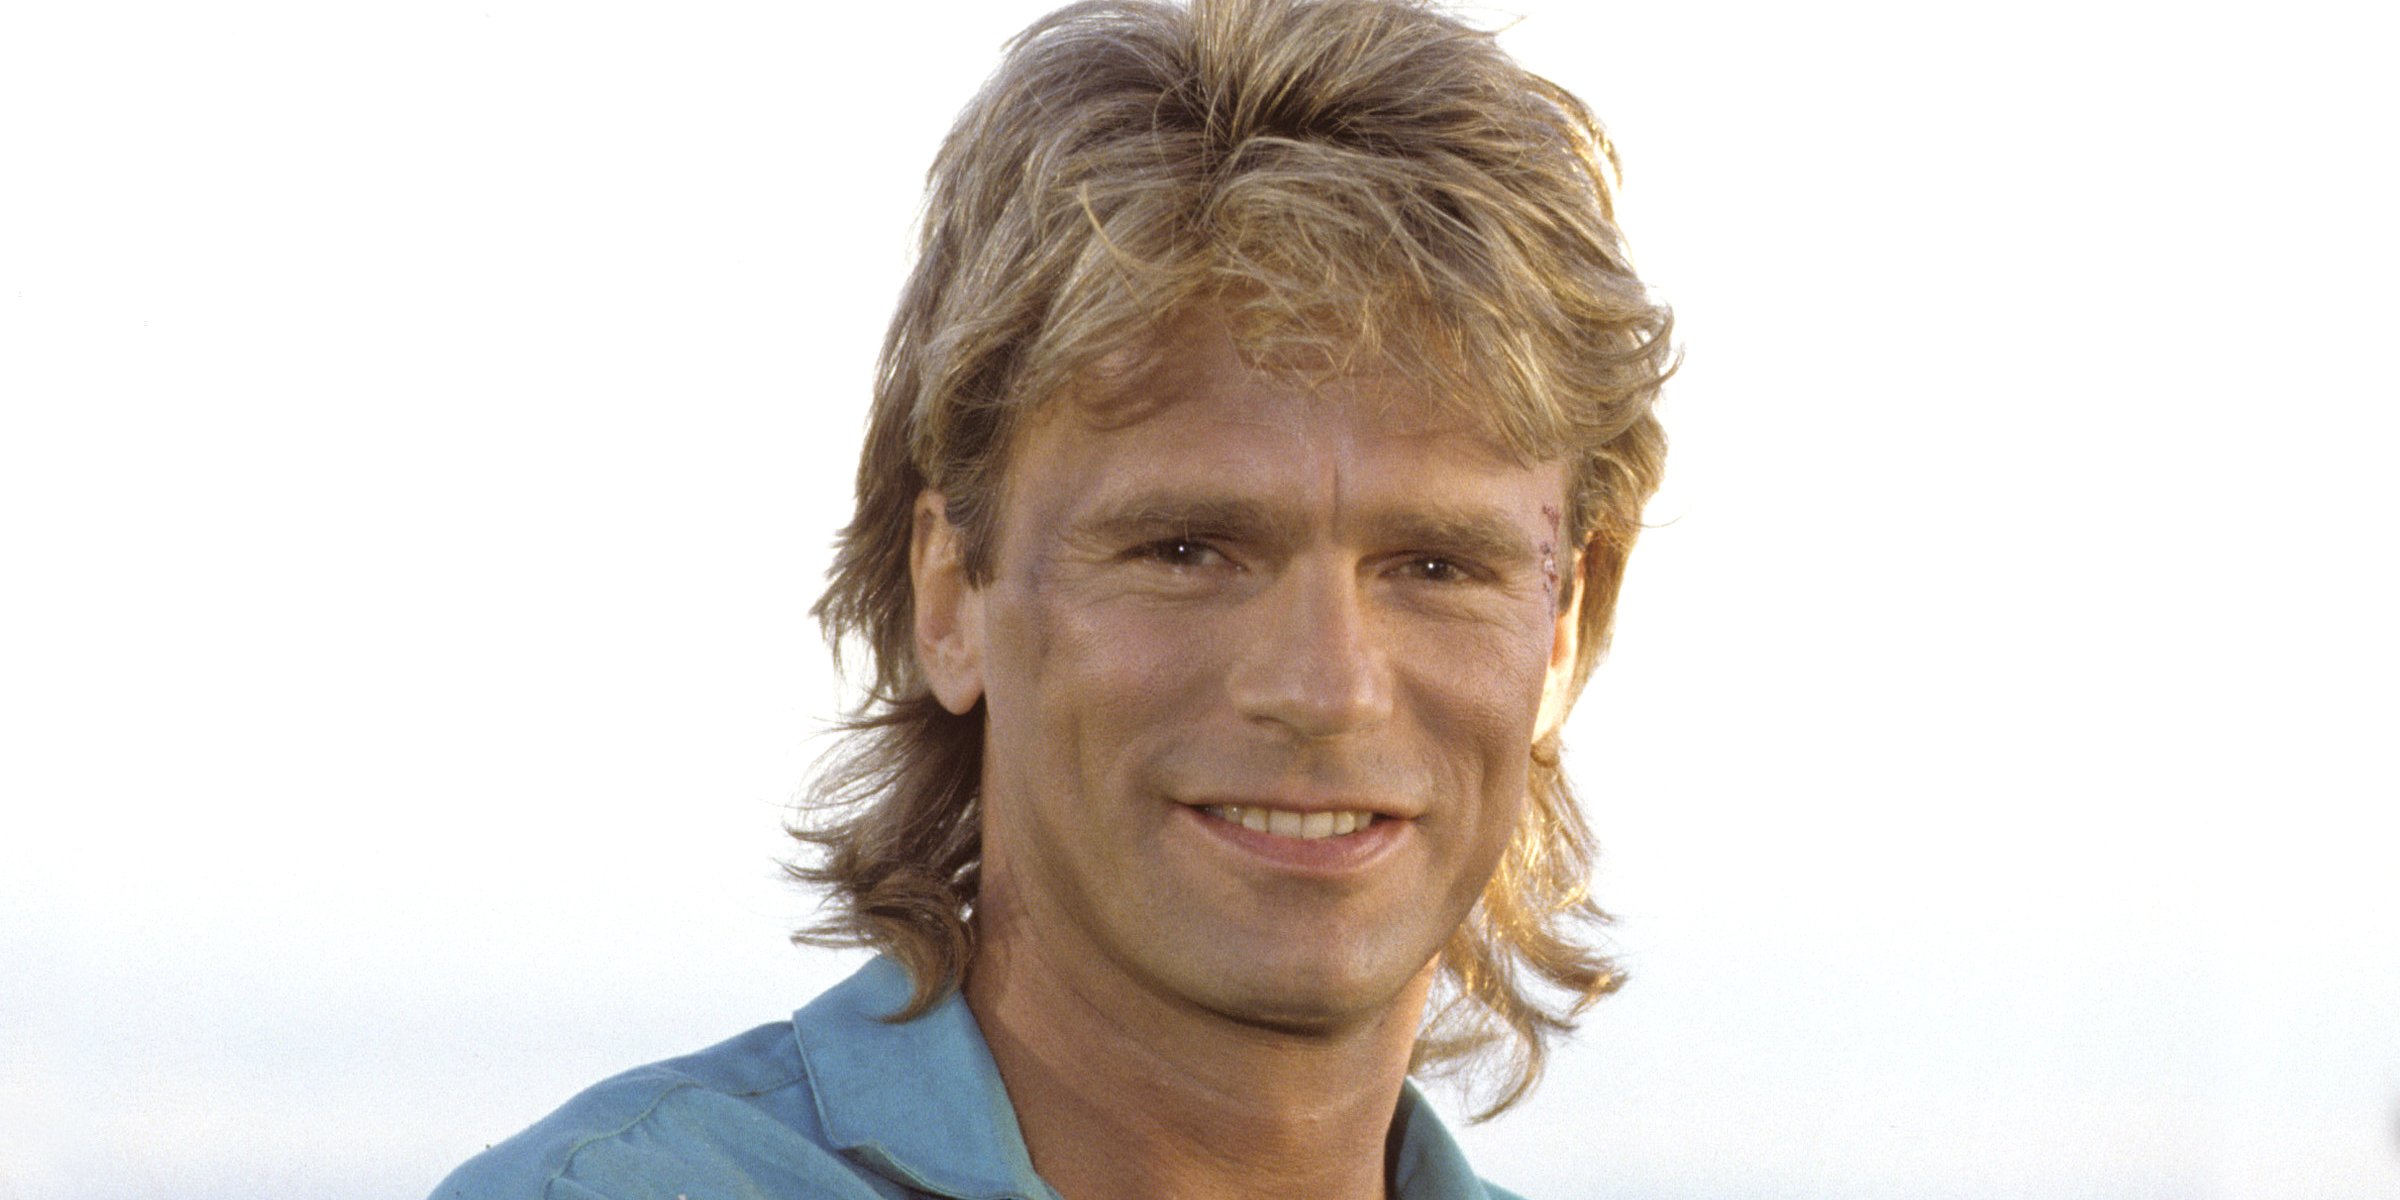 Richard Dean Anderson, 1989 | Source: Getty Images